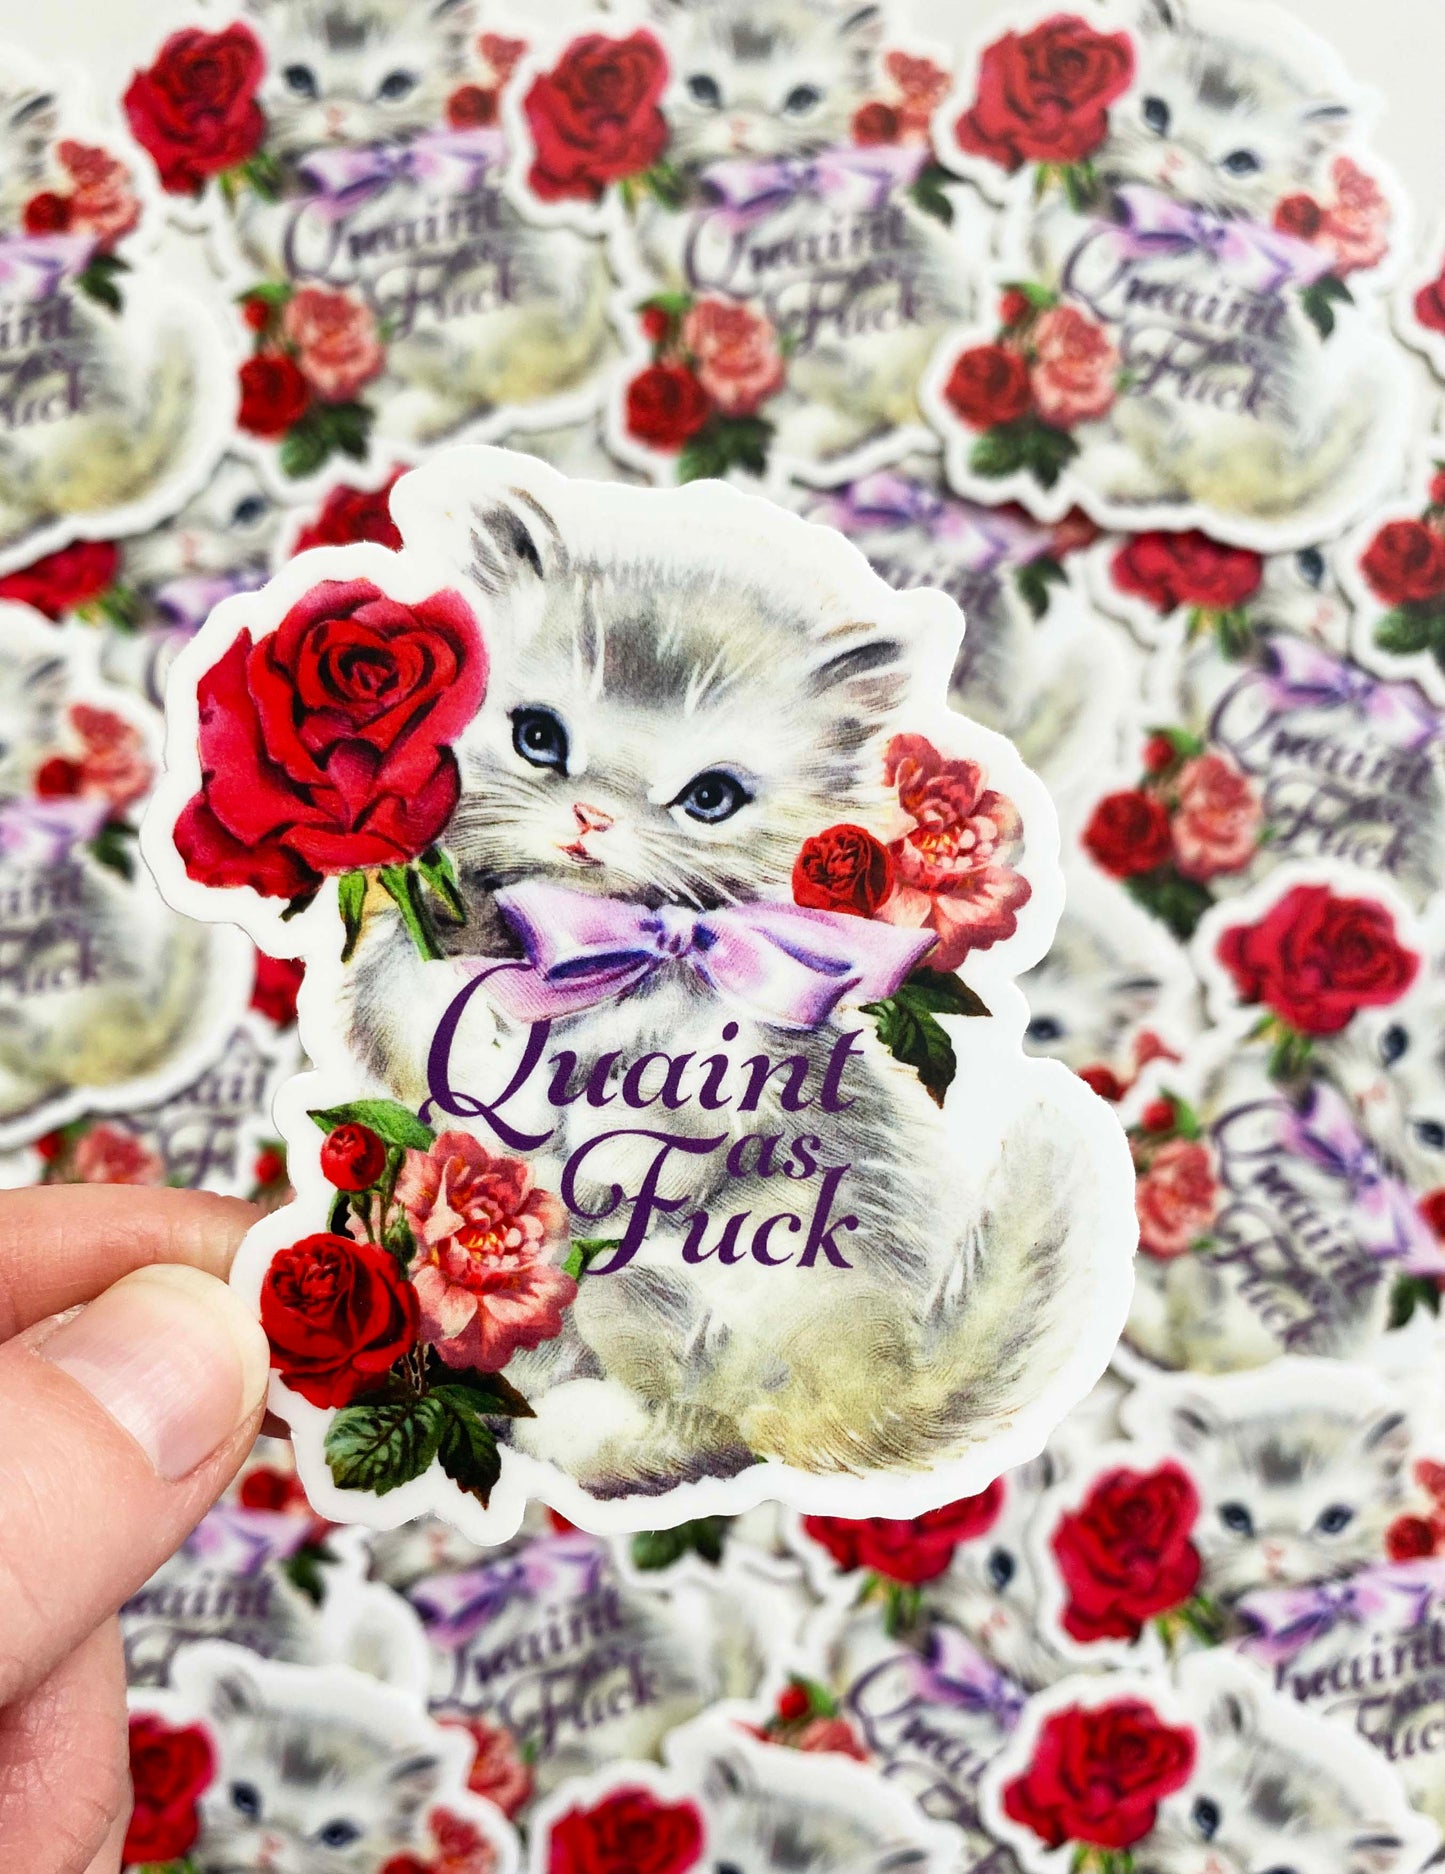 vintage white kitty with a purple bow and red roses funny phrase quaint as fuck cuss word cute sassy fancy adorable sticker